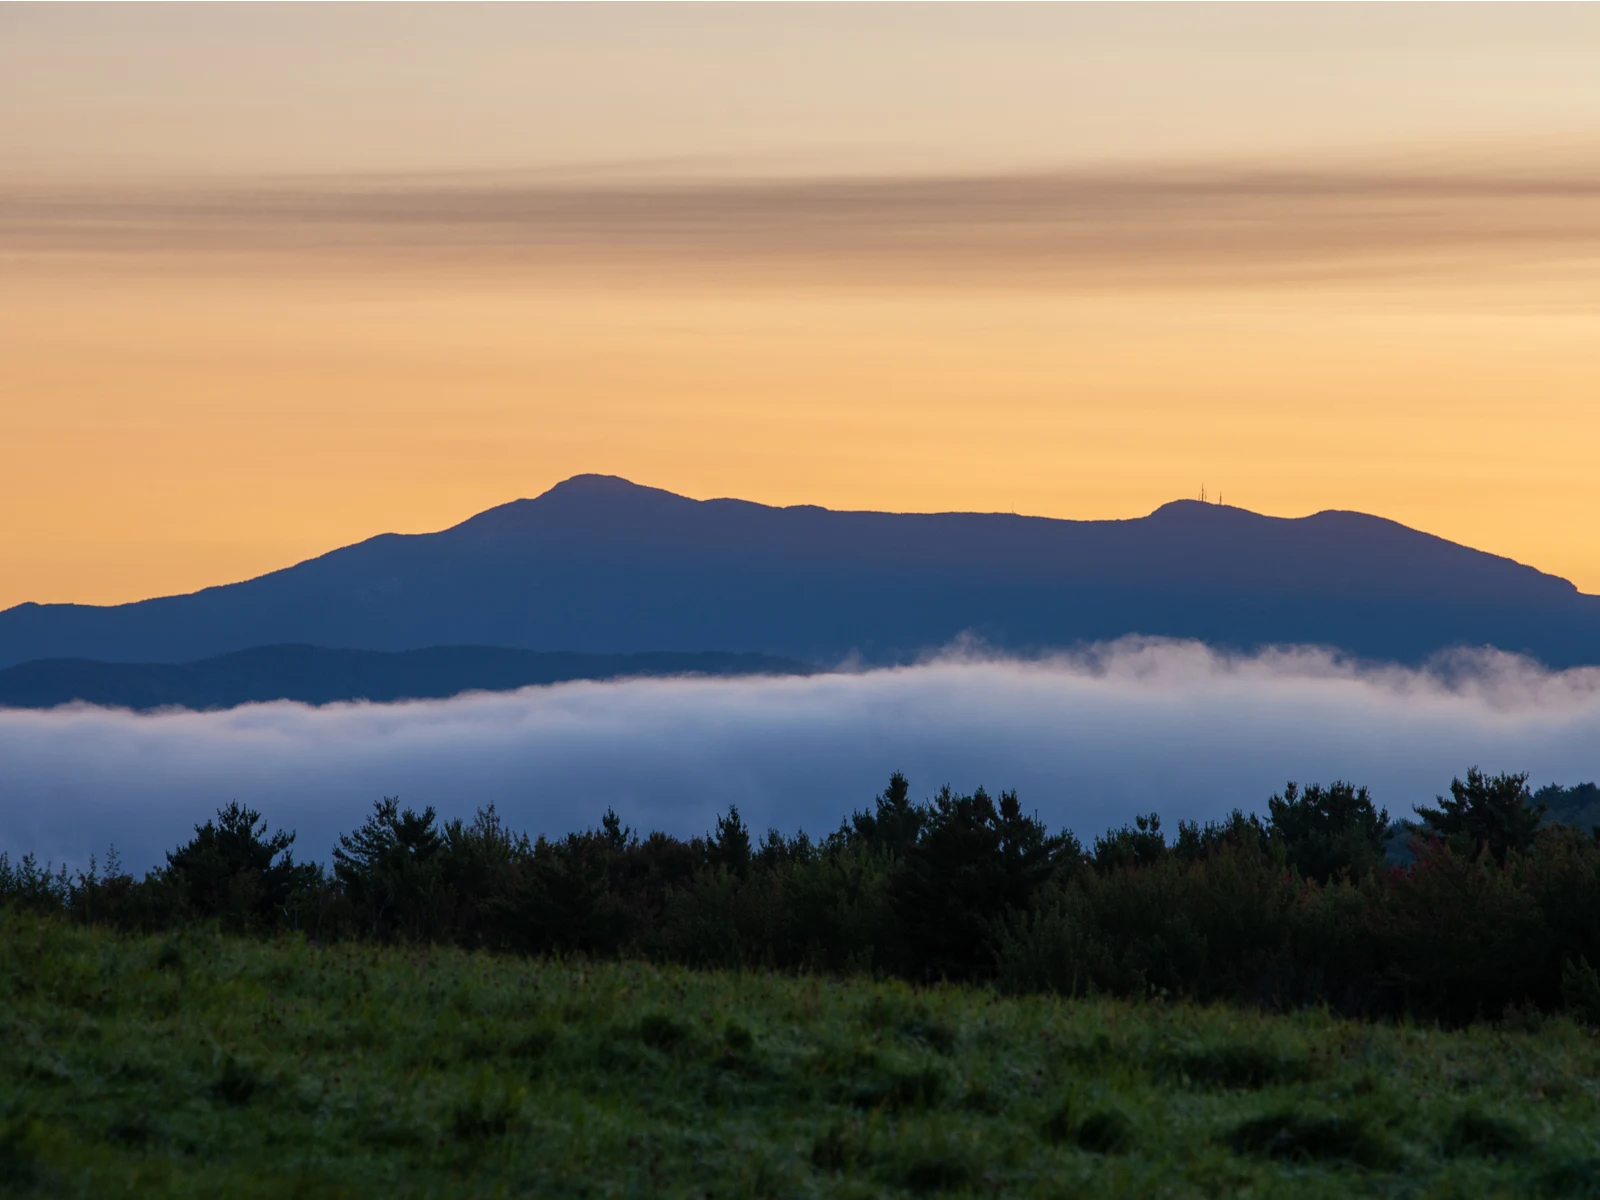 Pretty view of one of the best things to do in Vermont, Mount Mansfield, as seen in the Summer